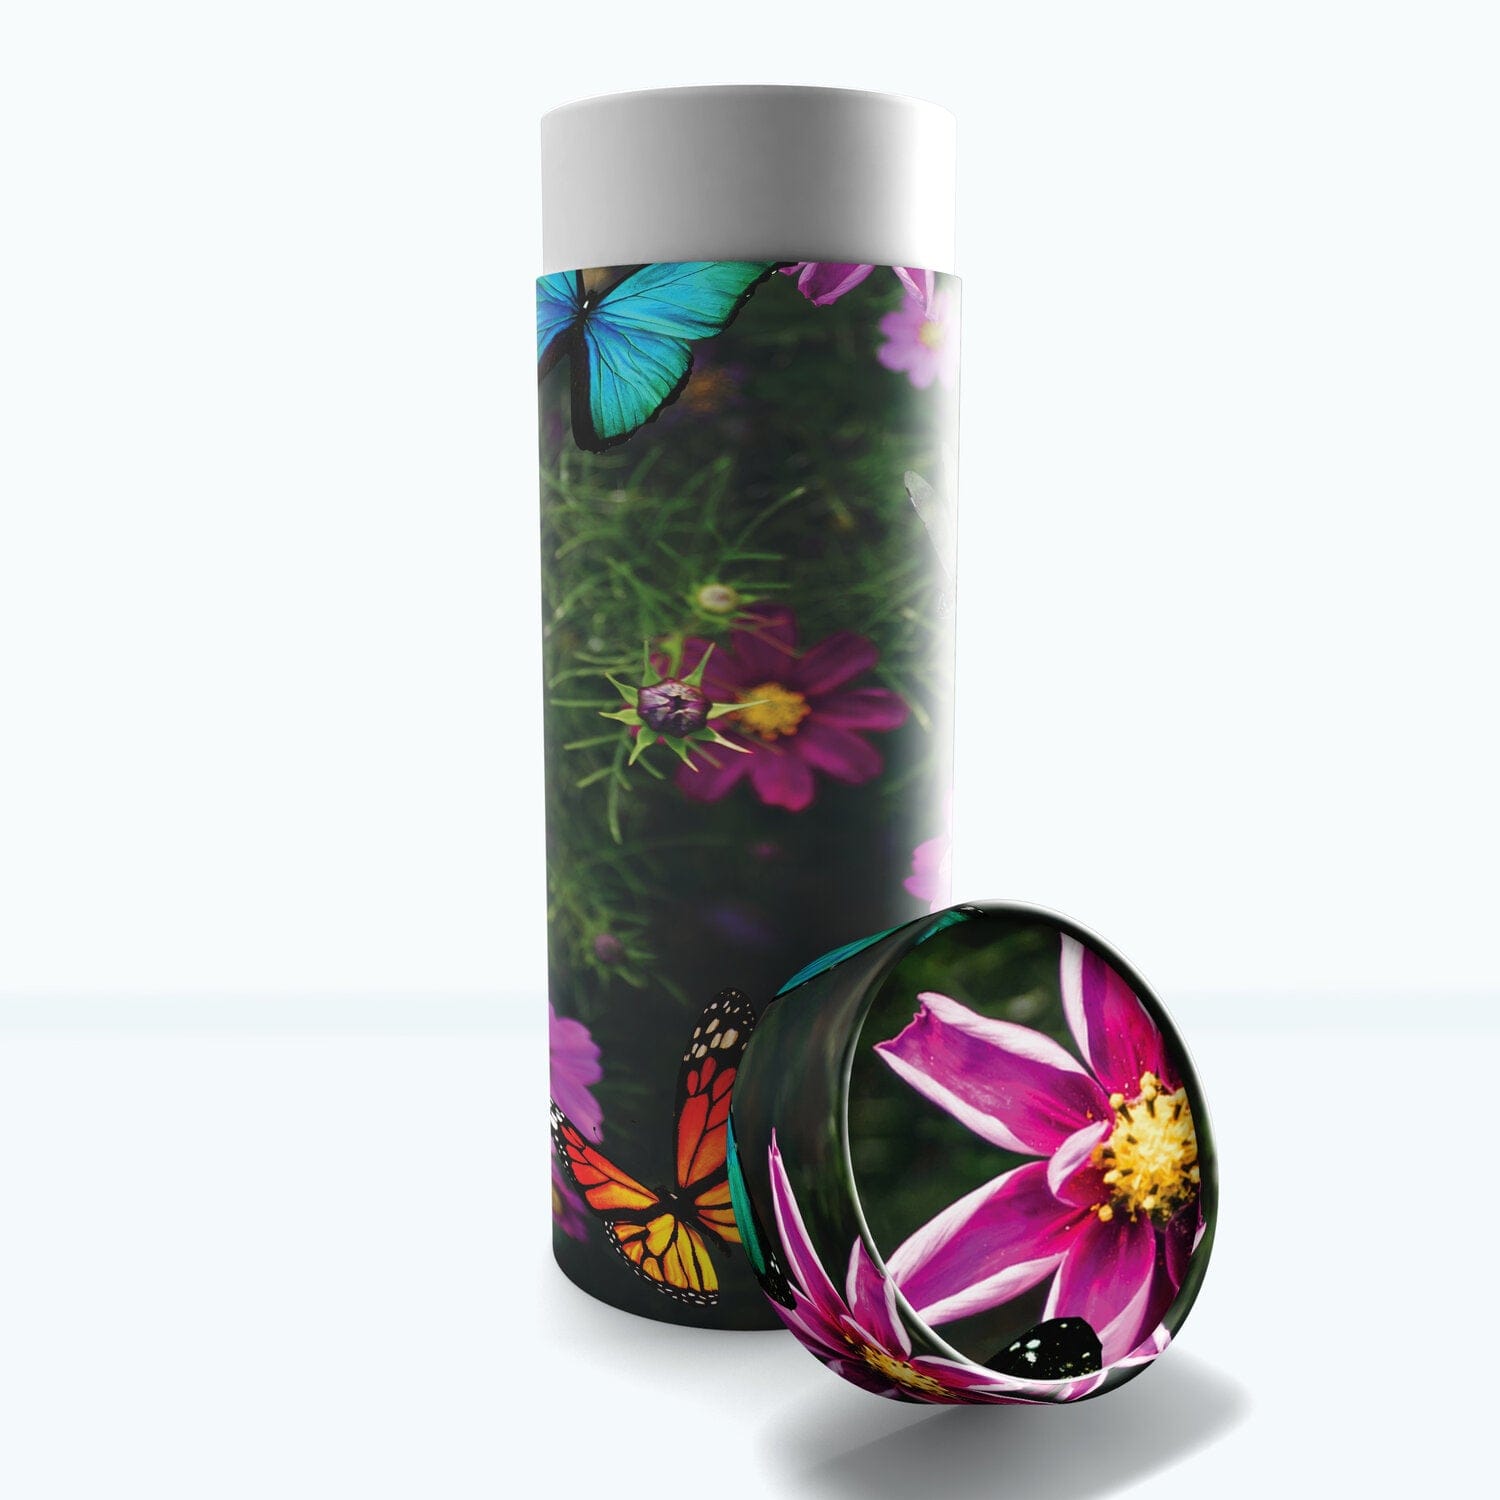 Commemorative Cremation Urns Small Magical Garden - Biodegradable & Eco Friendly Burial or Scattering Urn / Tube